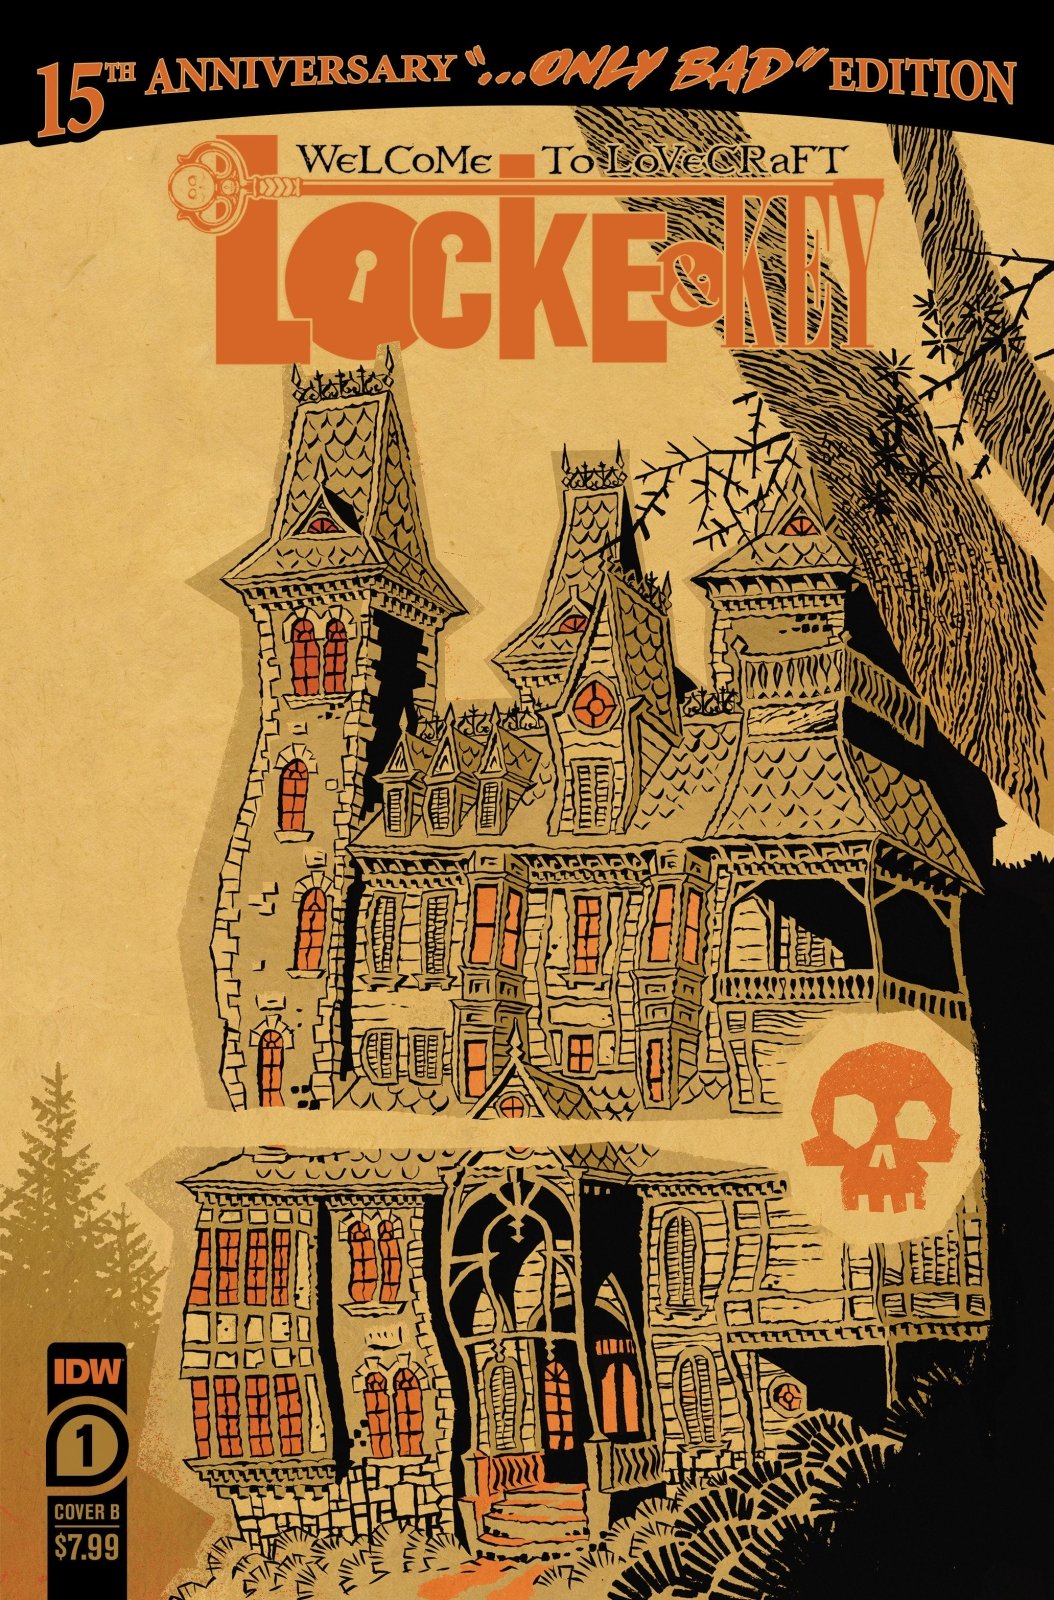 Locke & Key: Welcome To Lovecraft #1--15th Anniversary Edition Variant B (Gane) - The Fourth Place